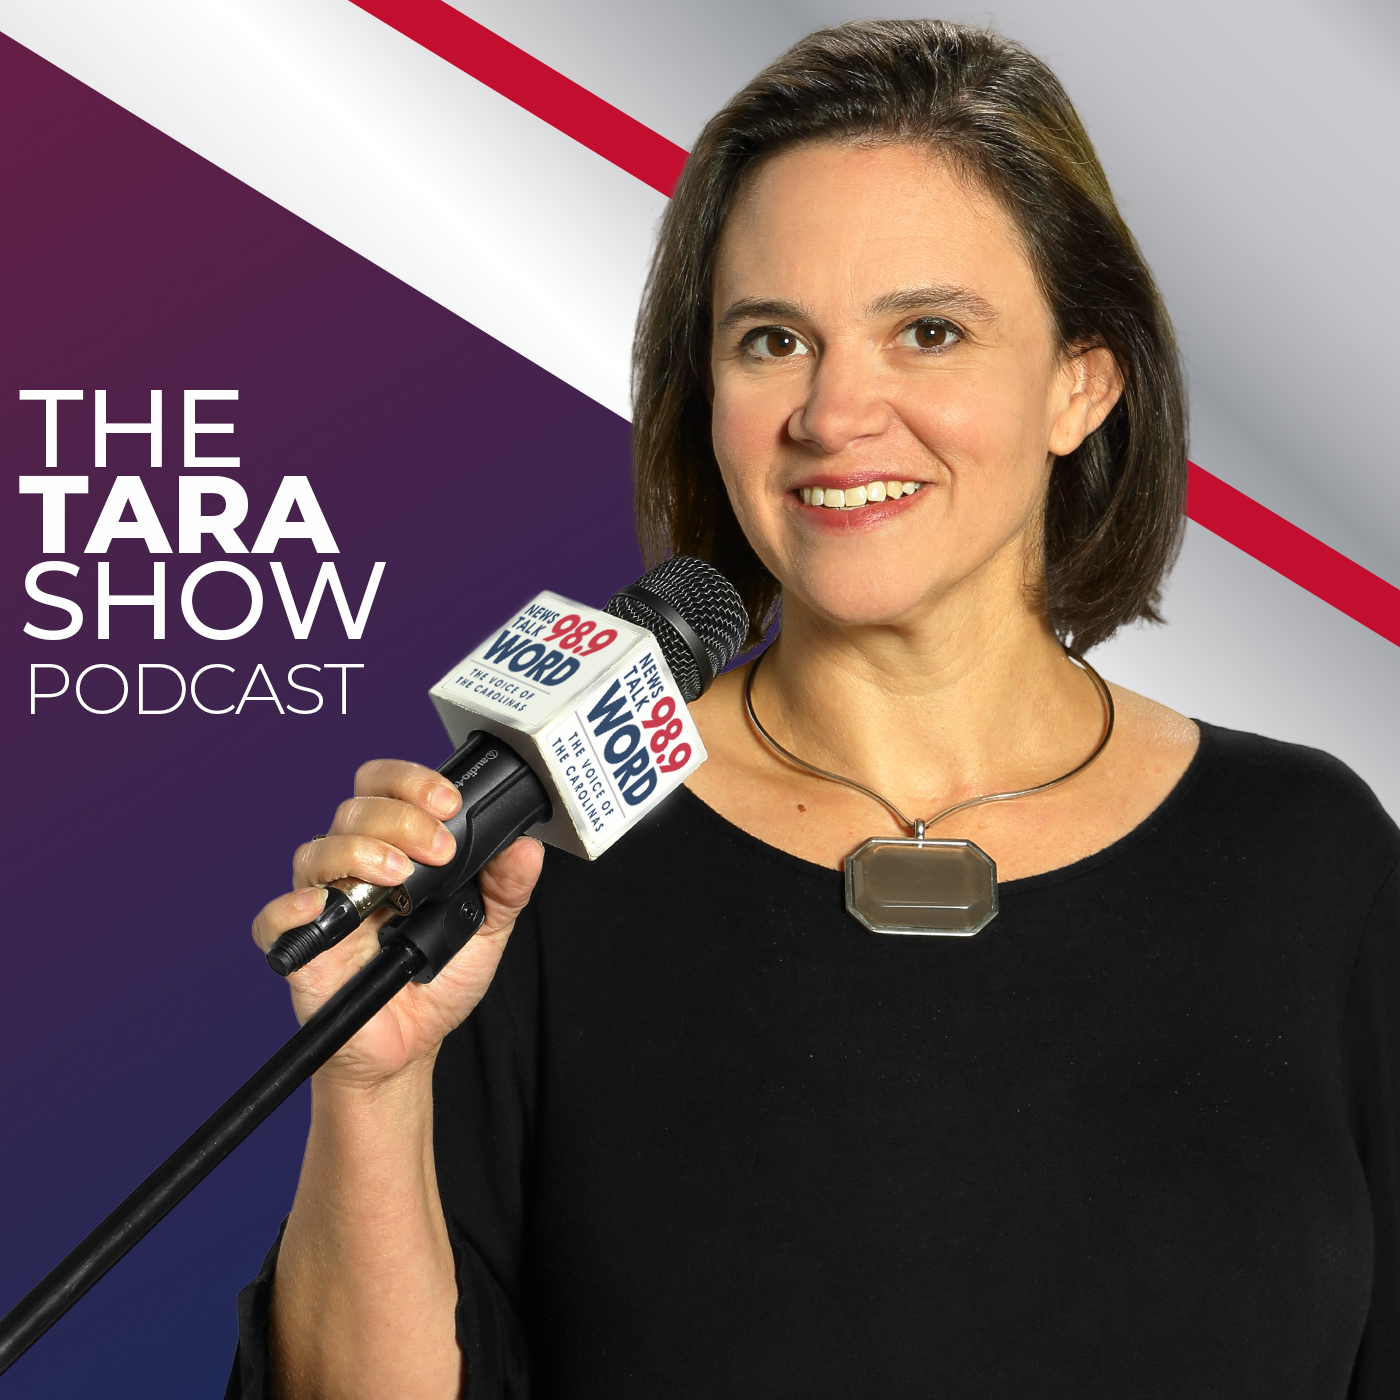 Hour 3: The Tara Show - “Democrat Faces Criticism from Charlamagne the God” “Our International Level of Humiliation is Complete” “What to Expect in Tonight's Debate” “Lawyer Pleas for Rachel Morin’s Mention in Tonight’s Debate”